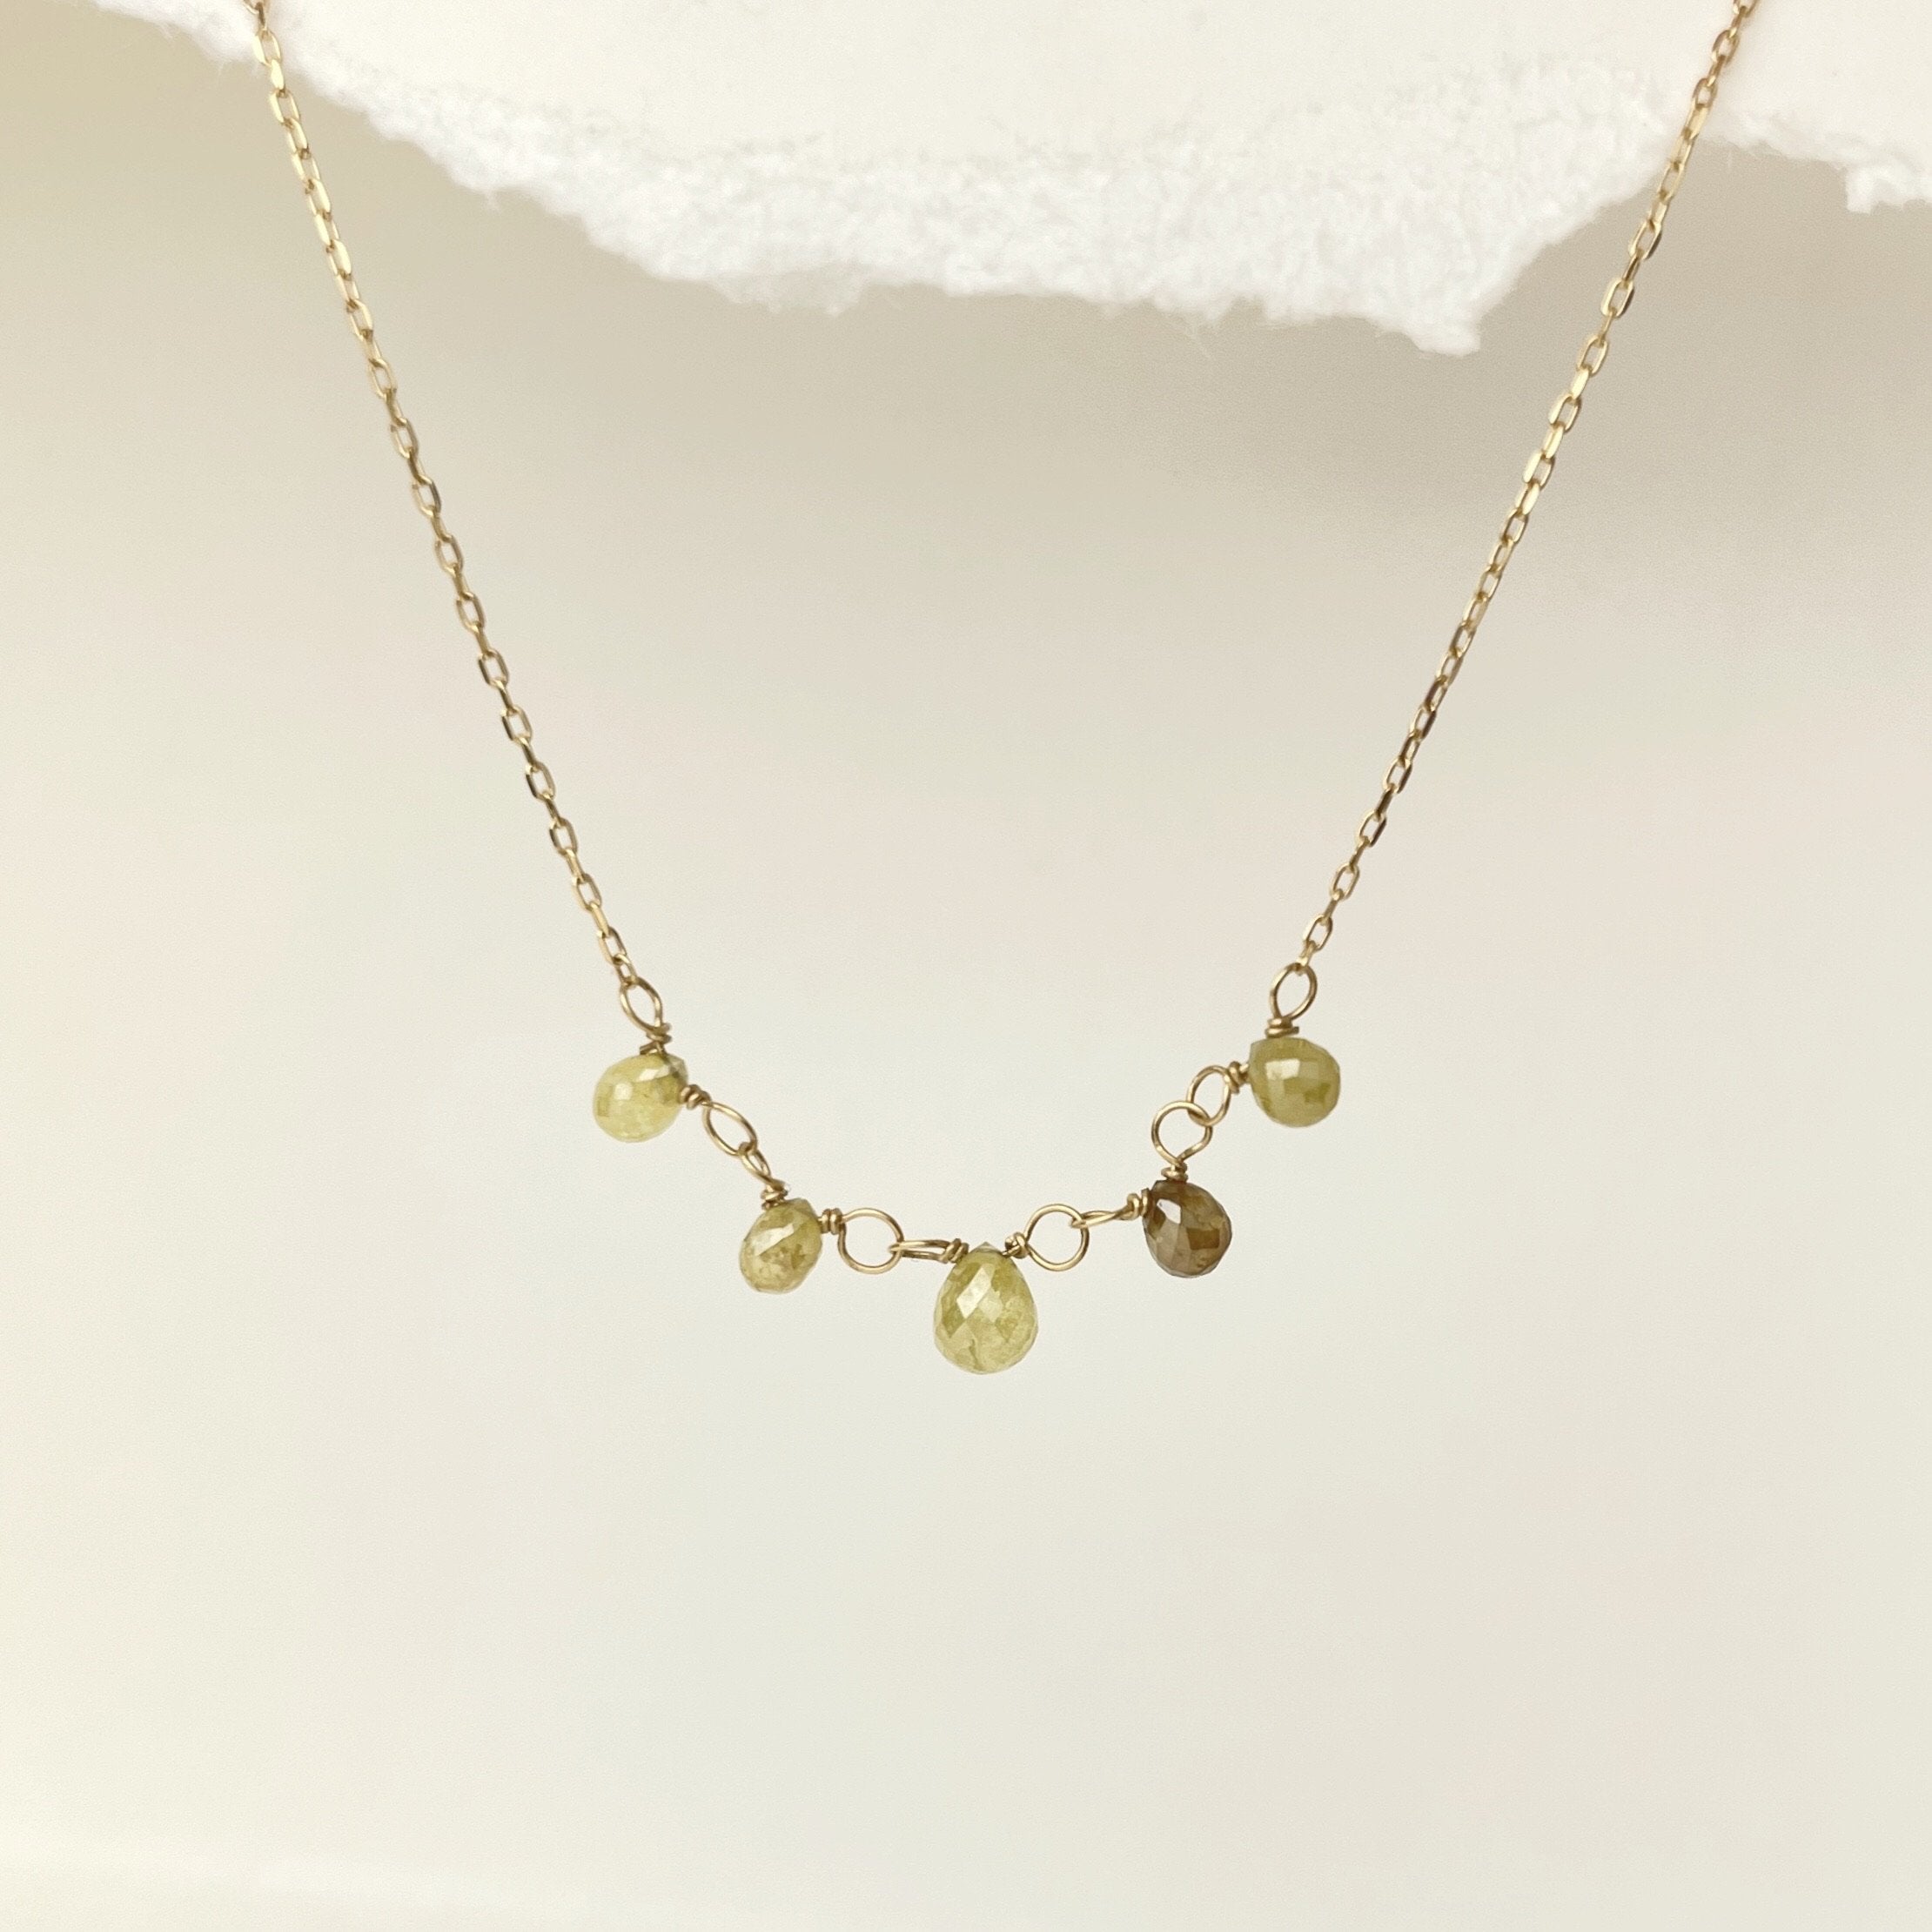 5 Sunny Tiny Briolettes on 18k Gold Chain